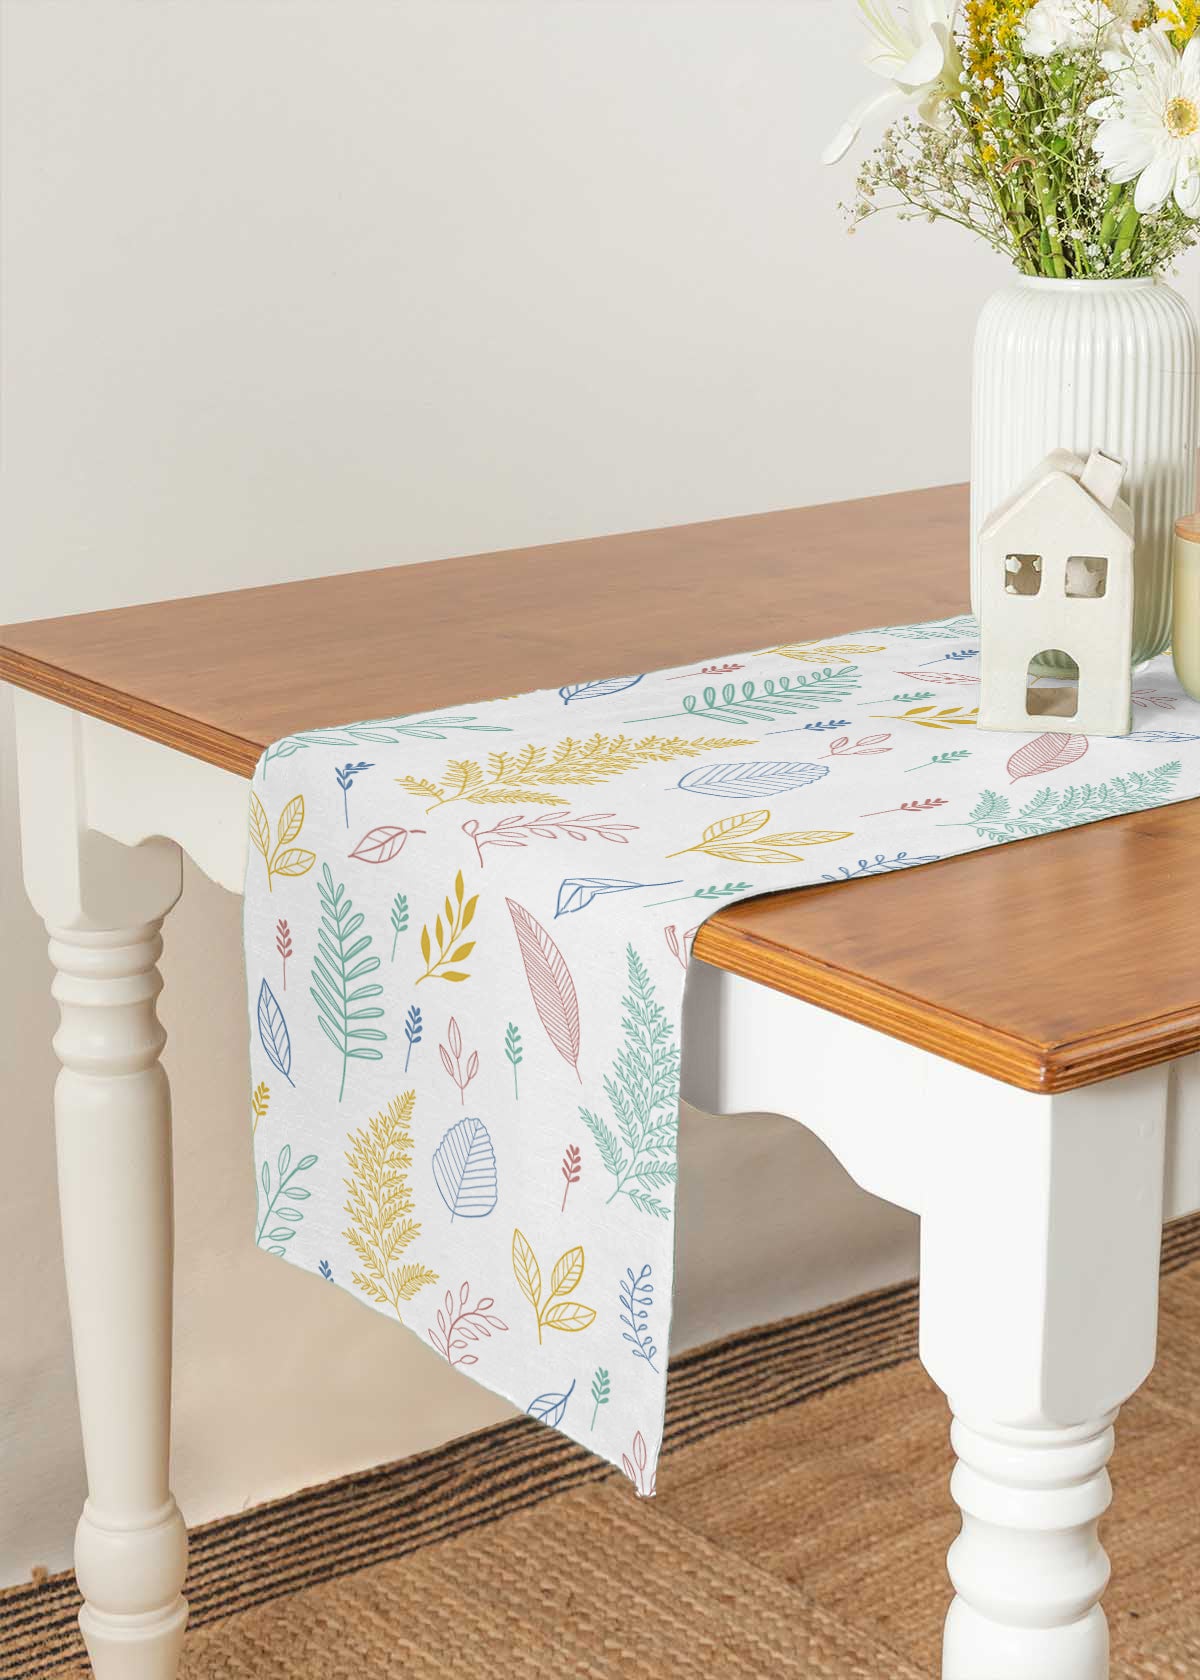 Rustling Leaves in Many hues Printed Cotton Table Runner - Multicolor